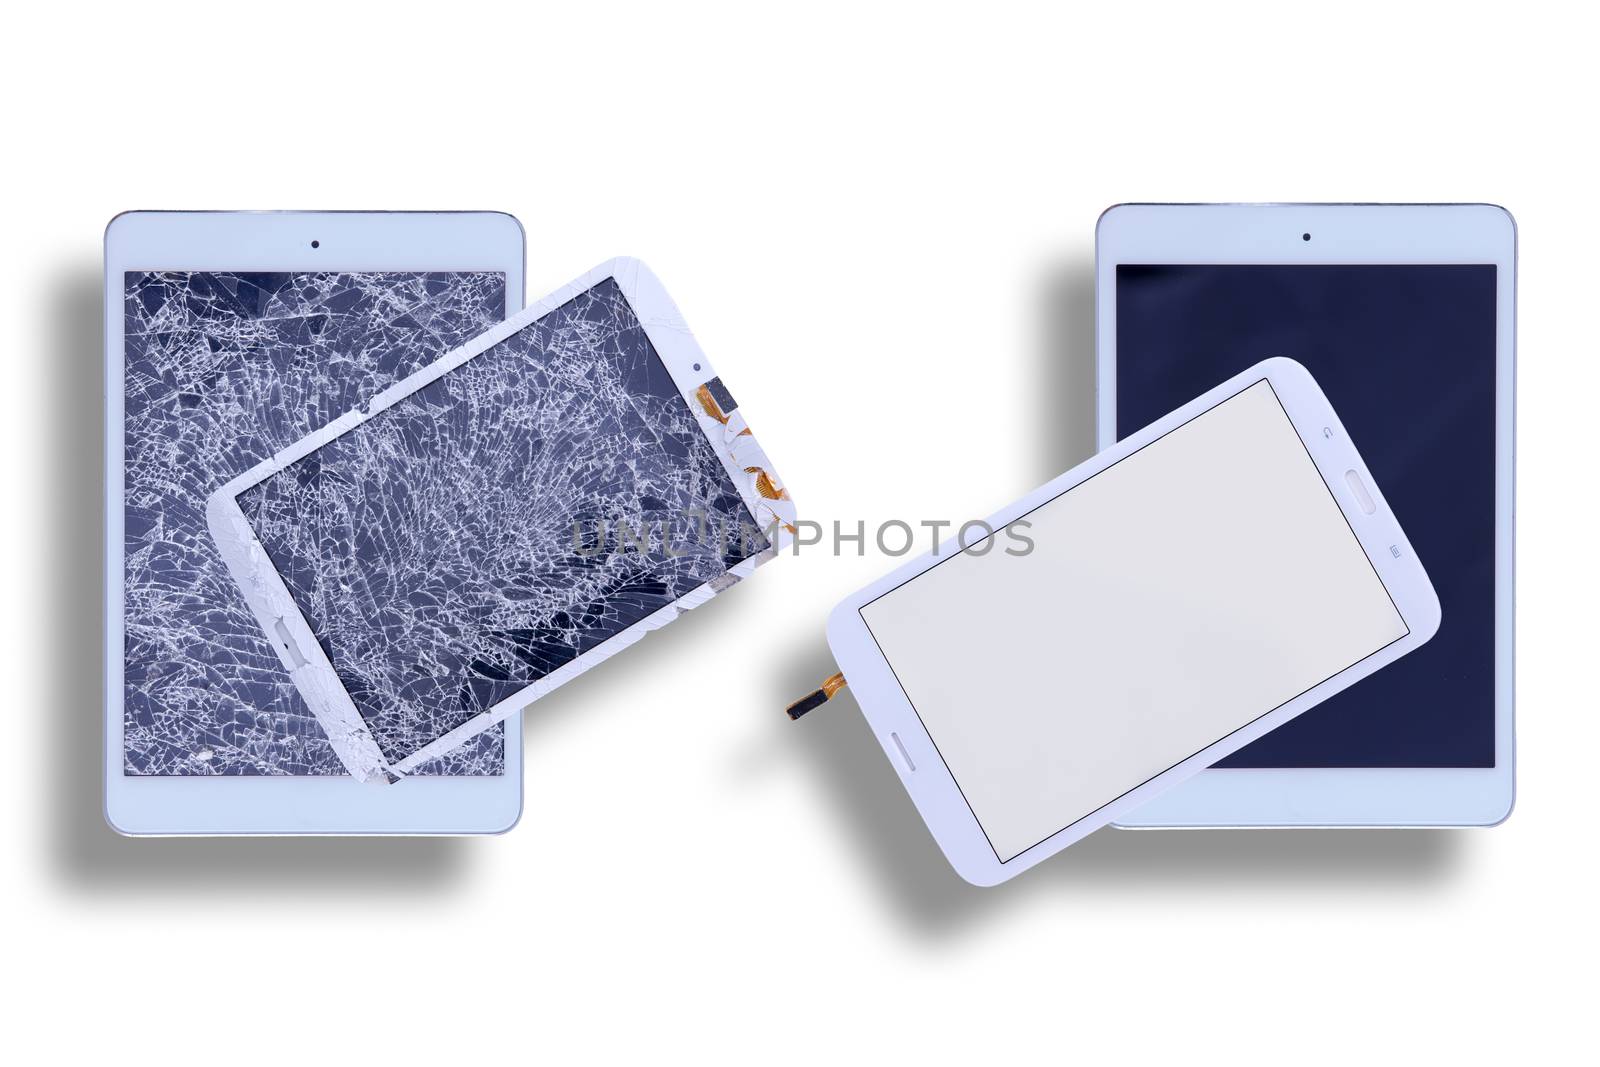 Overhead view of two tablets with shattered glass screens alongside two with repaired tablet screens in a comparative image on a white background